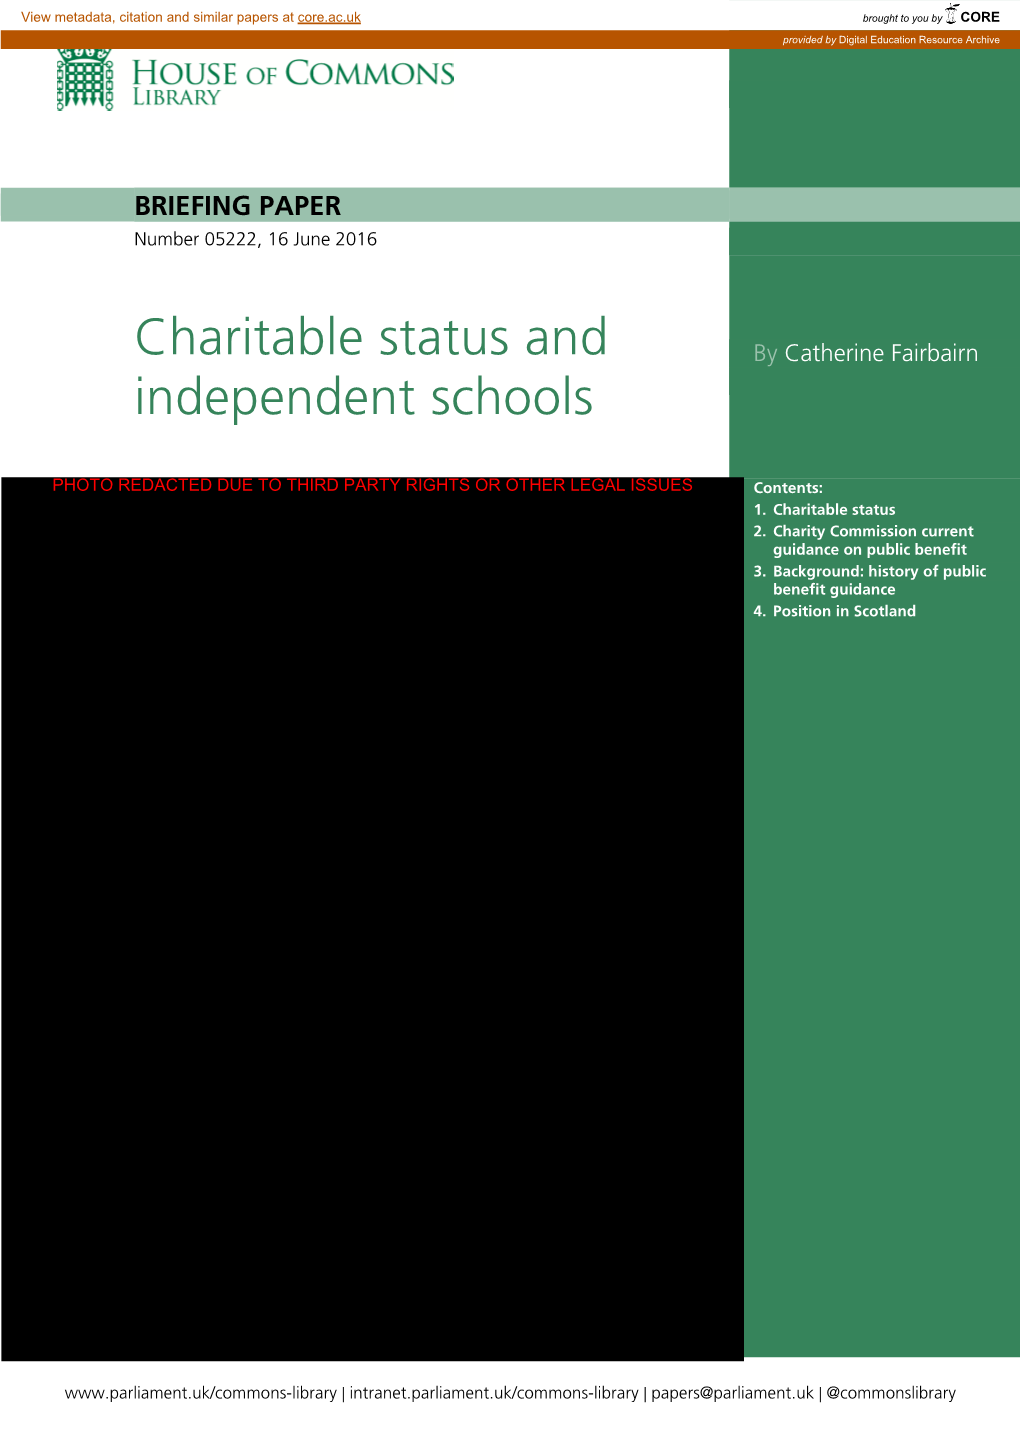 Charitable Status and Independent Schools